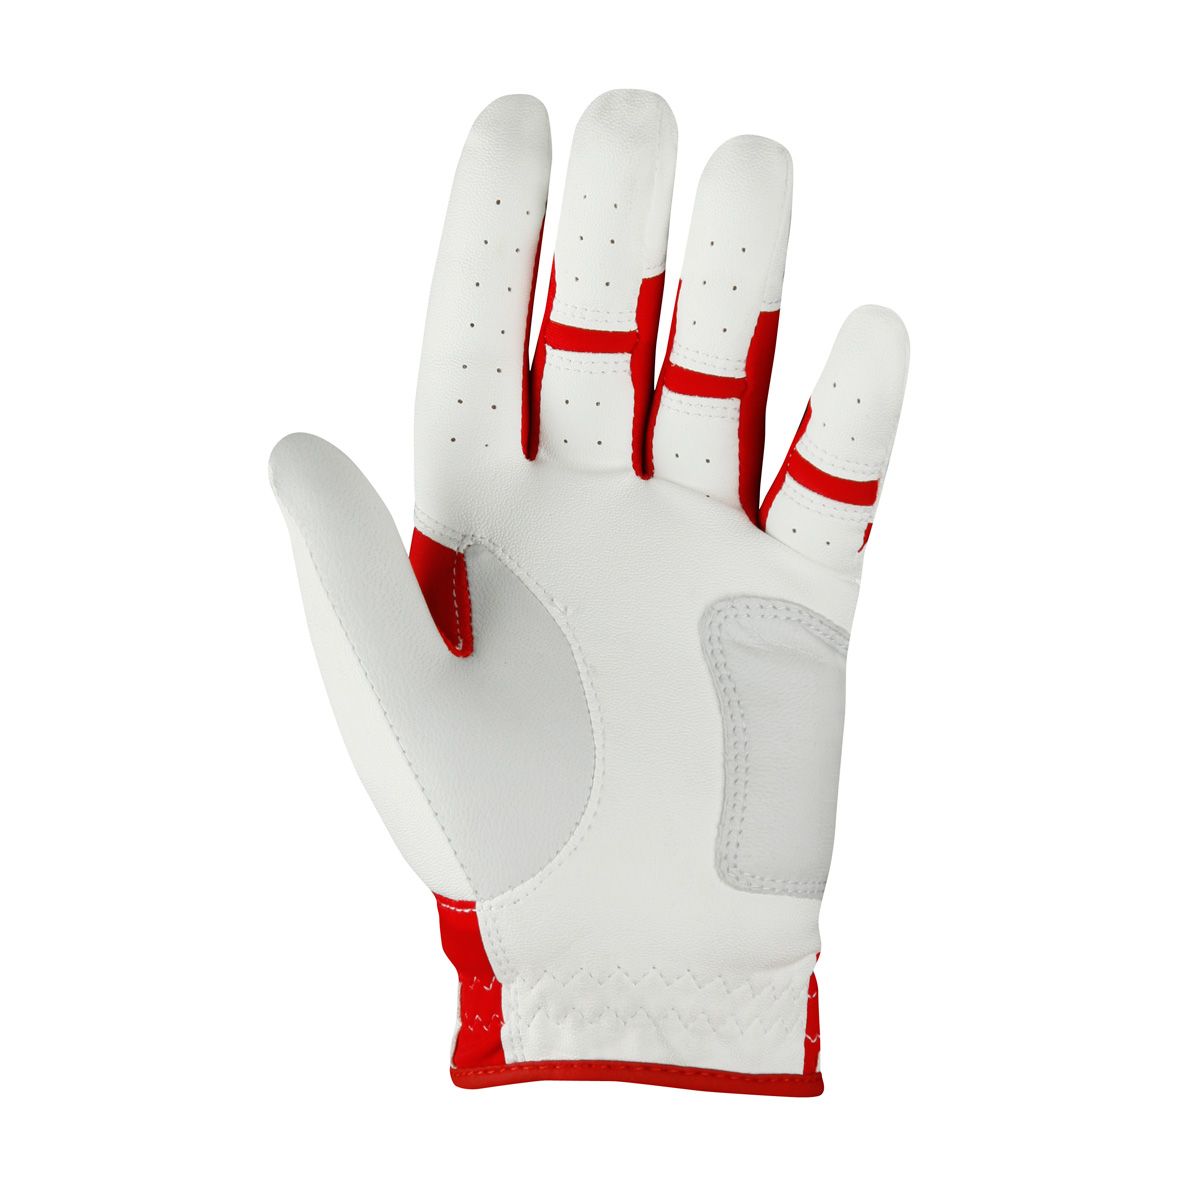 palm view of a white/red Intech Junior Golf Glove